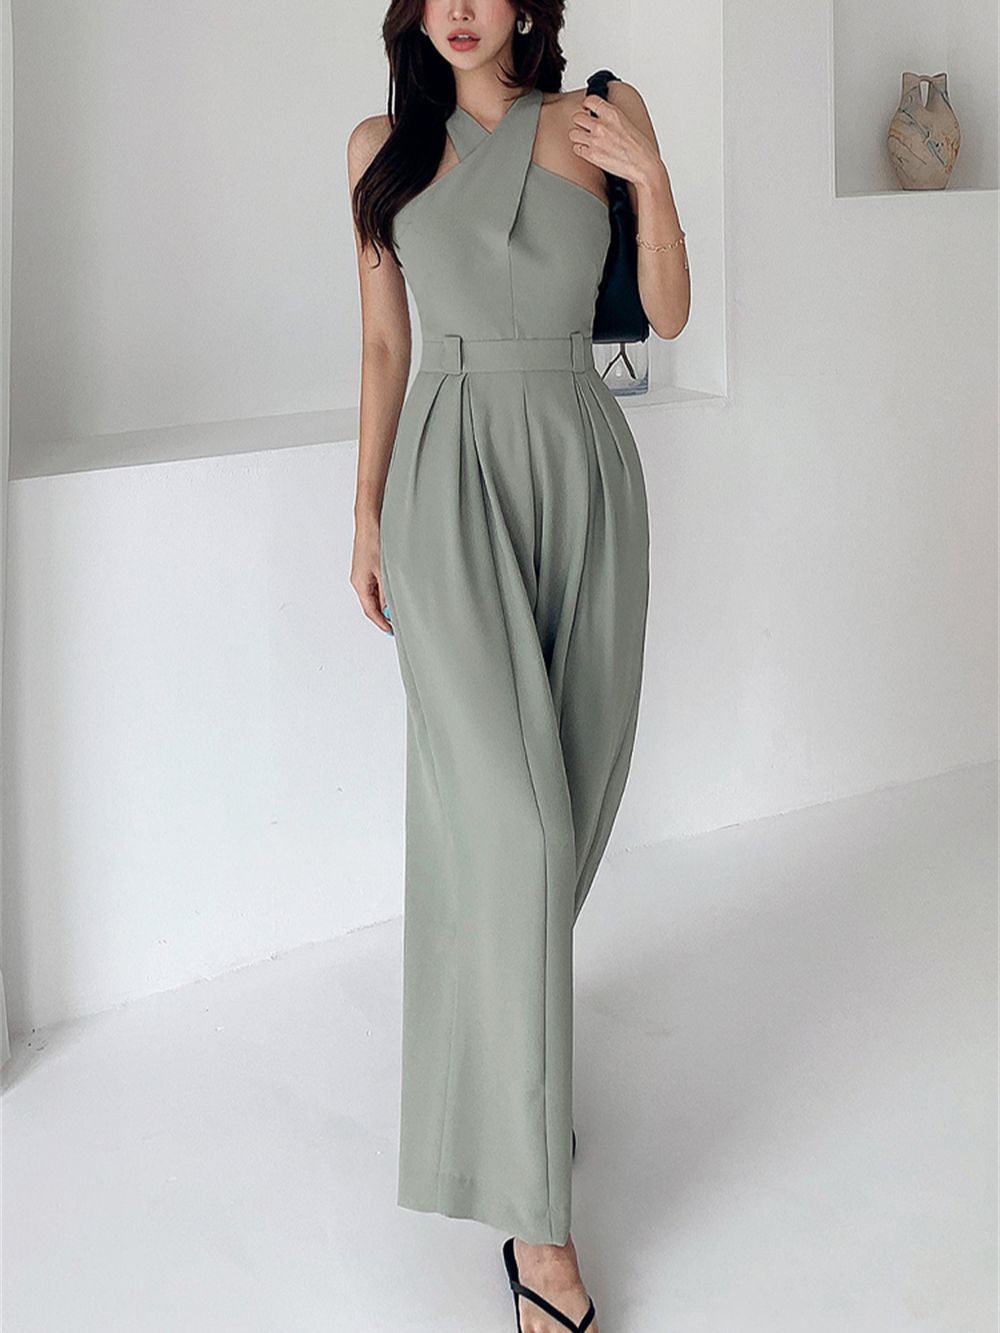 Drespot Summer New Women Jumpsuits Sexy Backless Rompers Female Solid Wide Leg Office Lady Playsuits